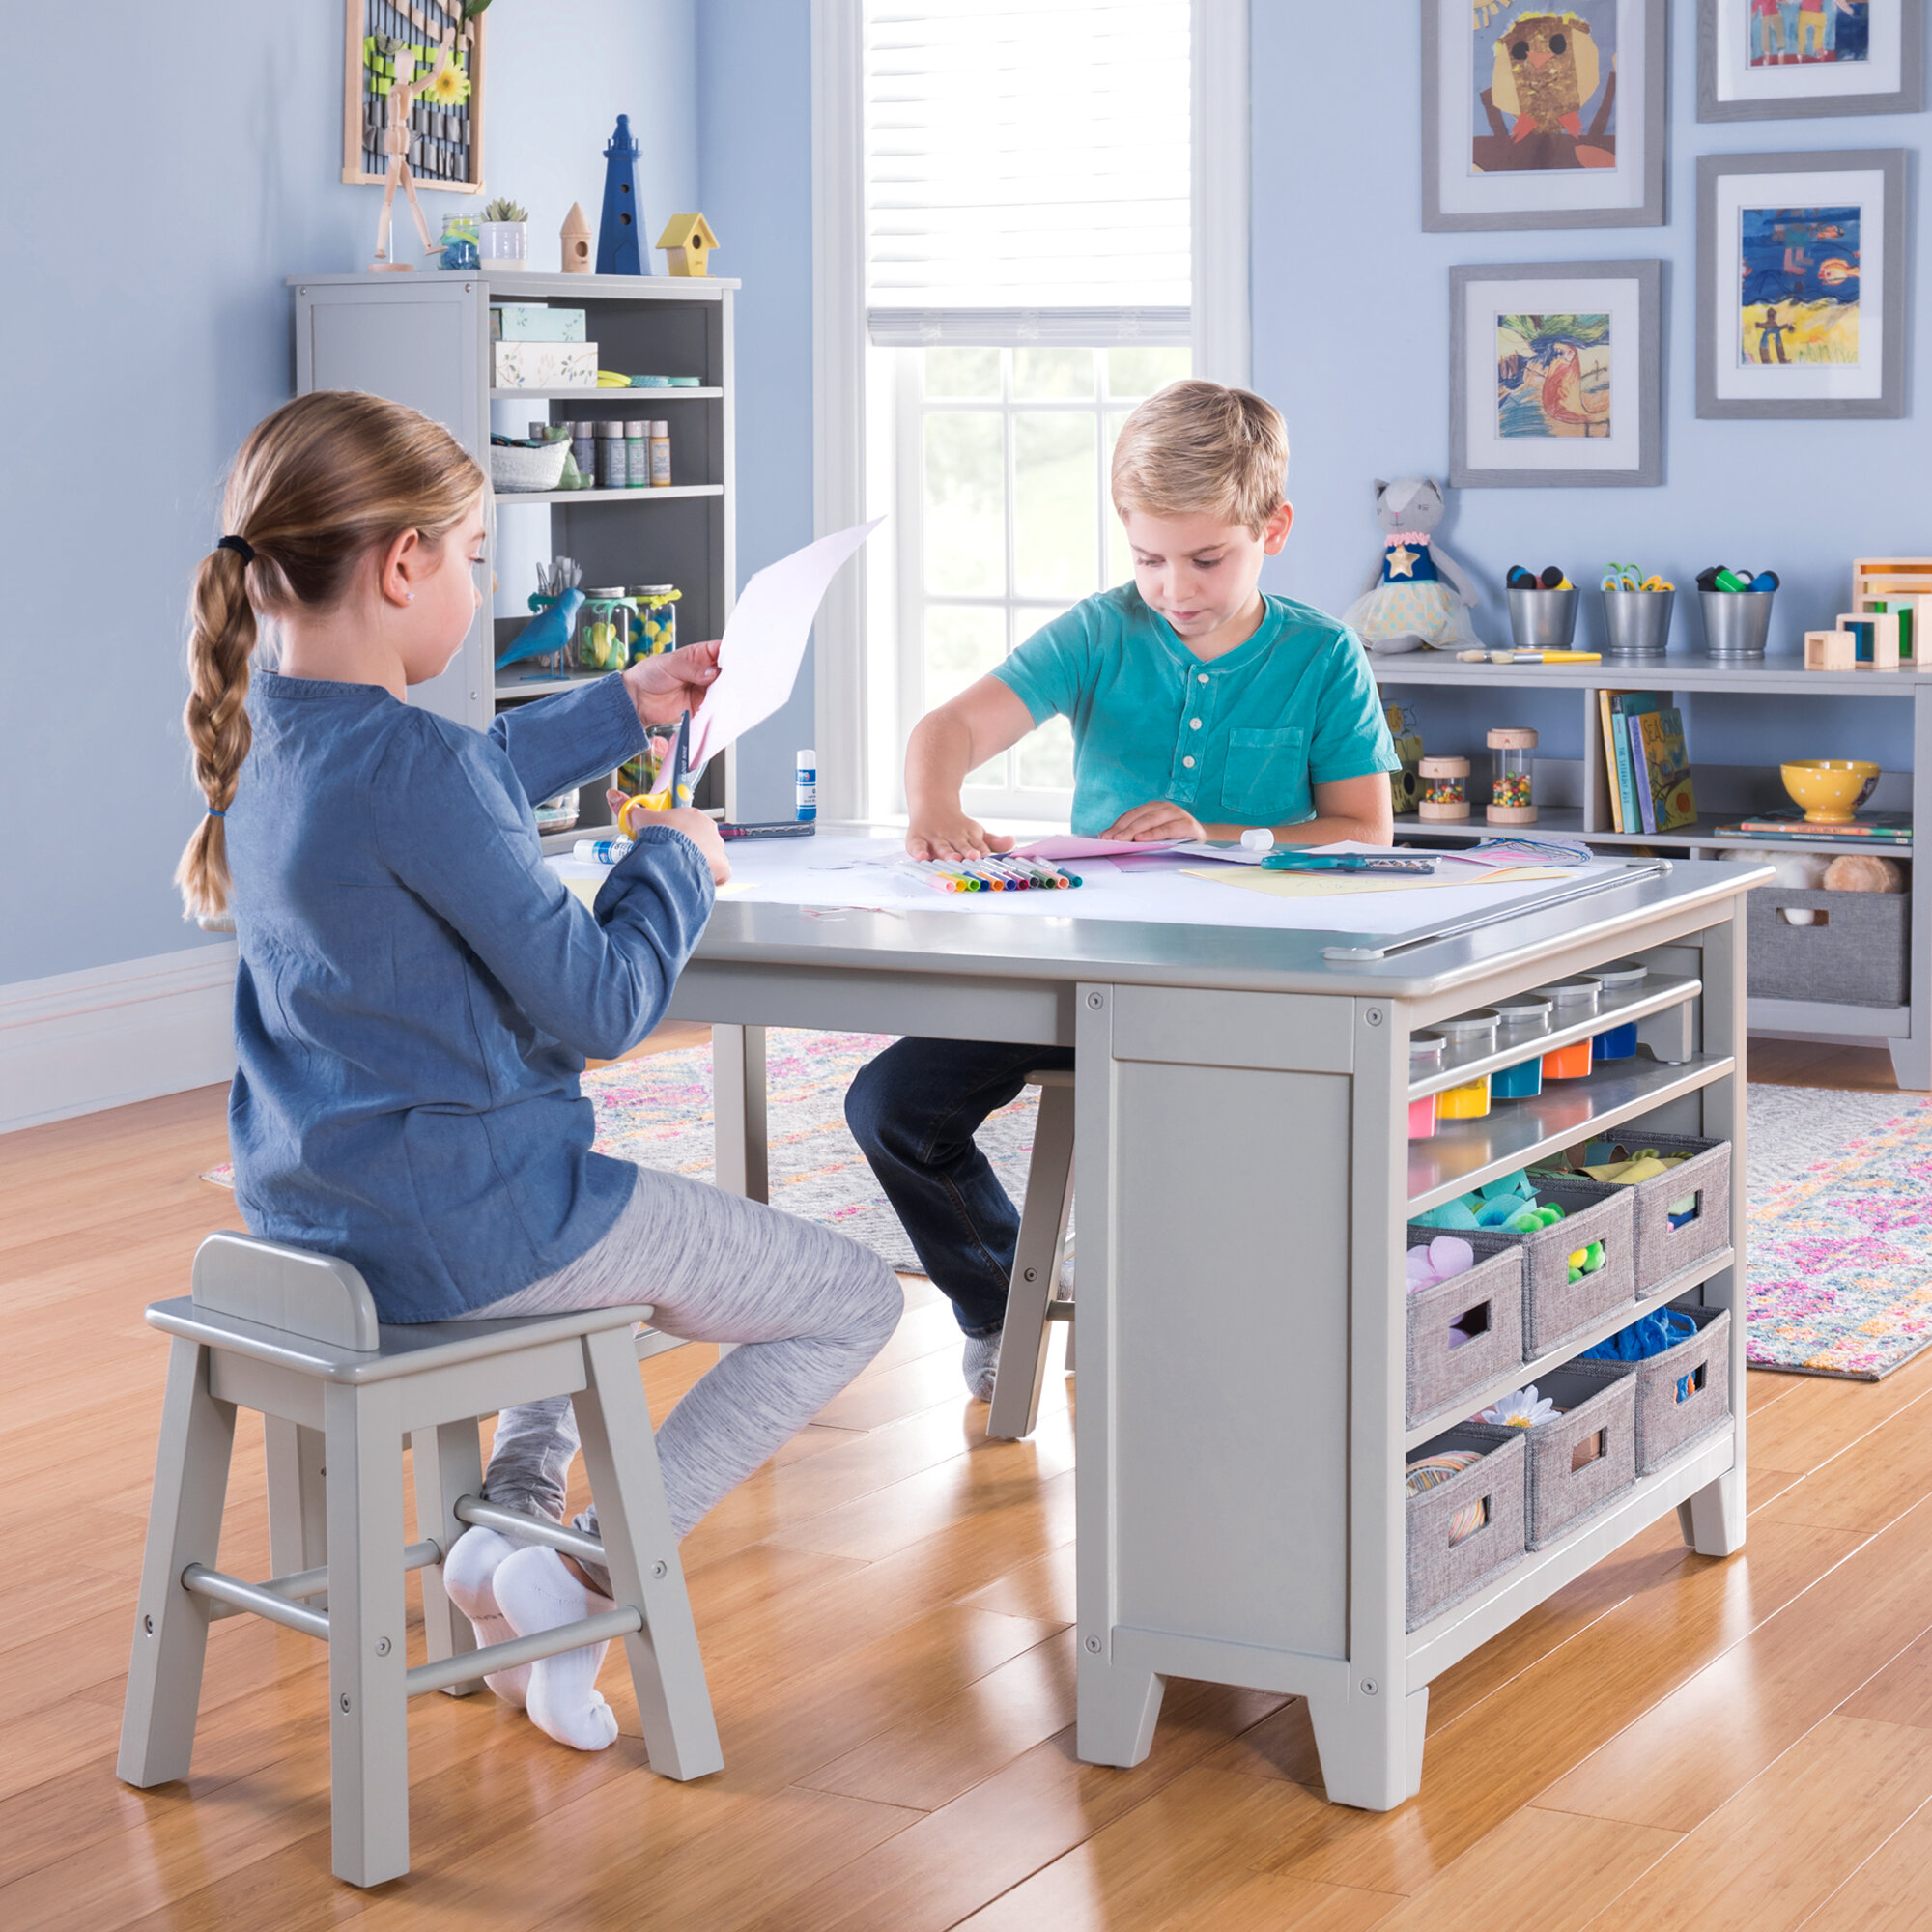 https://secure.img1-cg.wfcdn.com/im/80652553/compr-r85/1342/134260221/martha-stewart-living-learning-kids-art-table-and-chairs-set.jpg